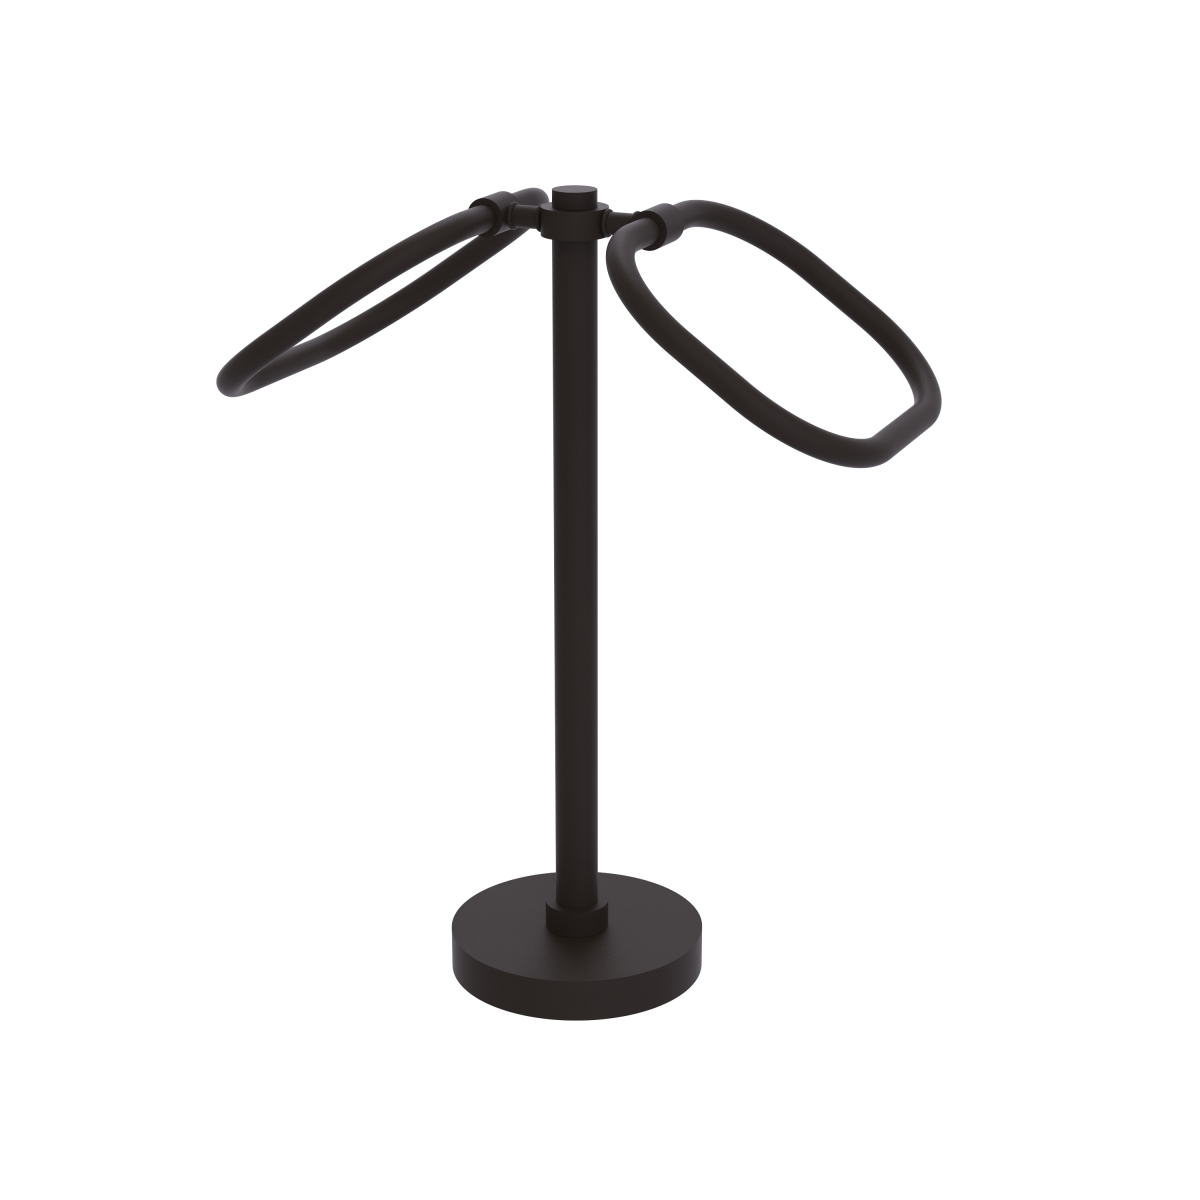 TB-20-ORB Two Ring Oval Guest Towel Holder, Oil Rubbed Bronze